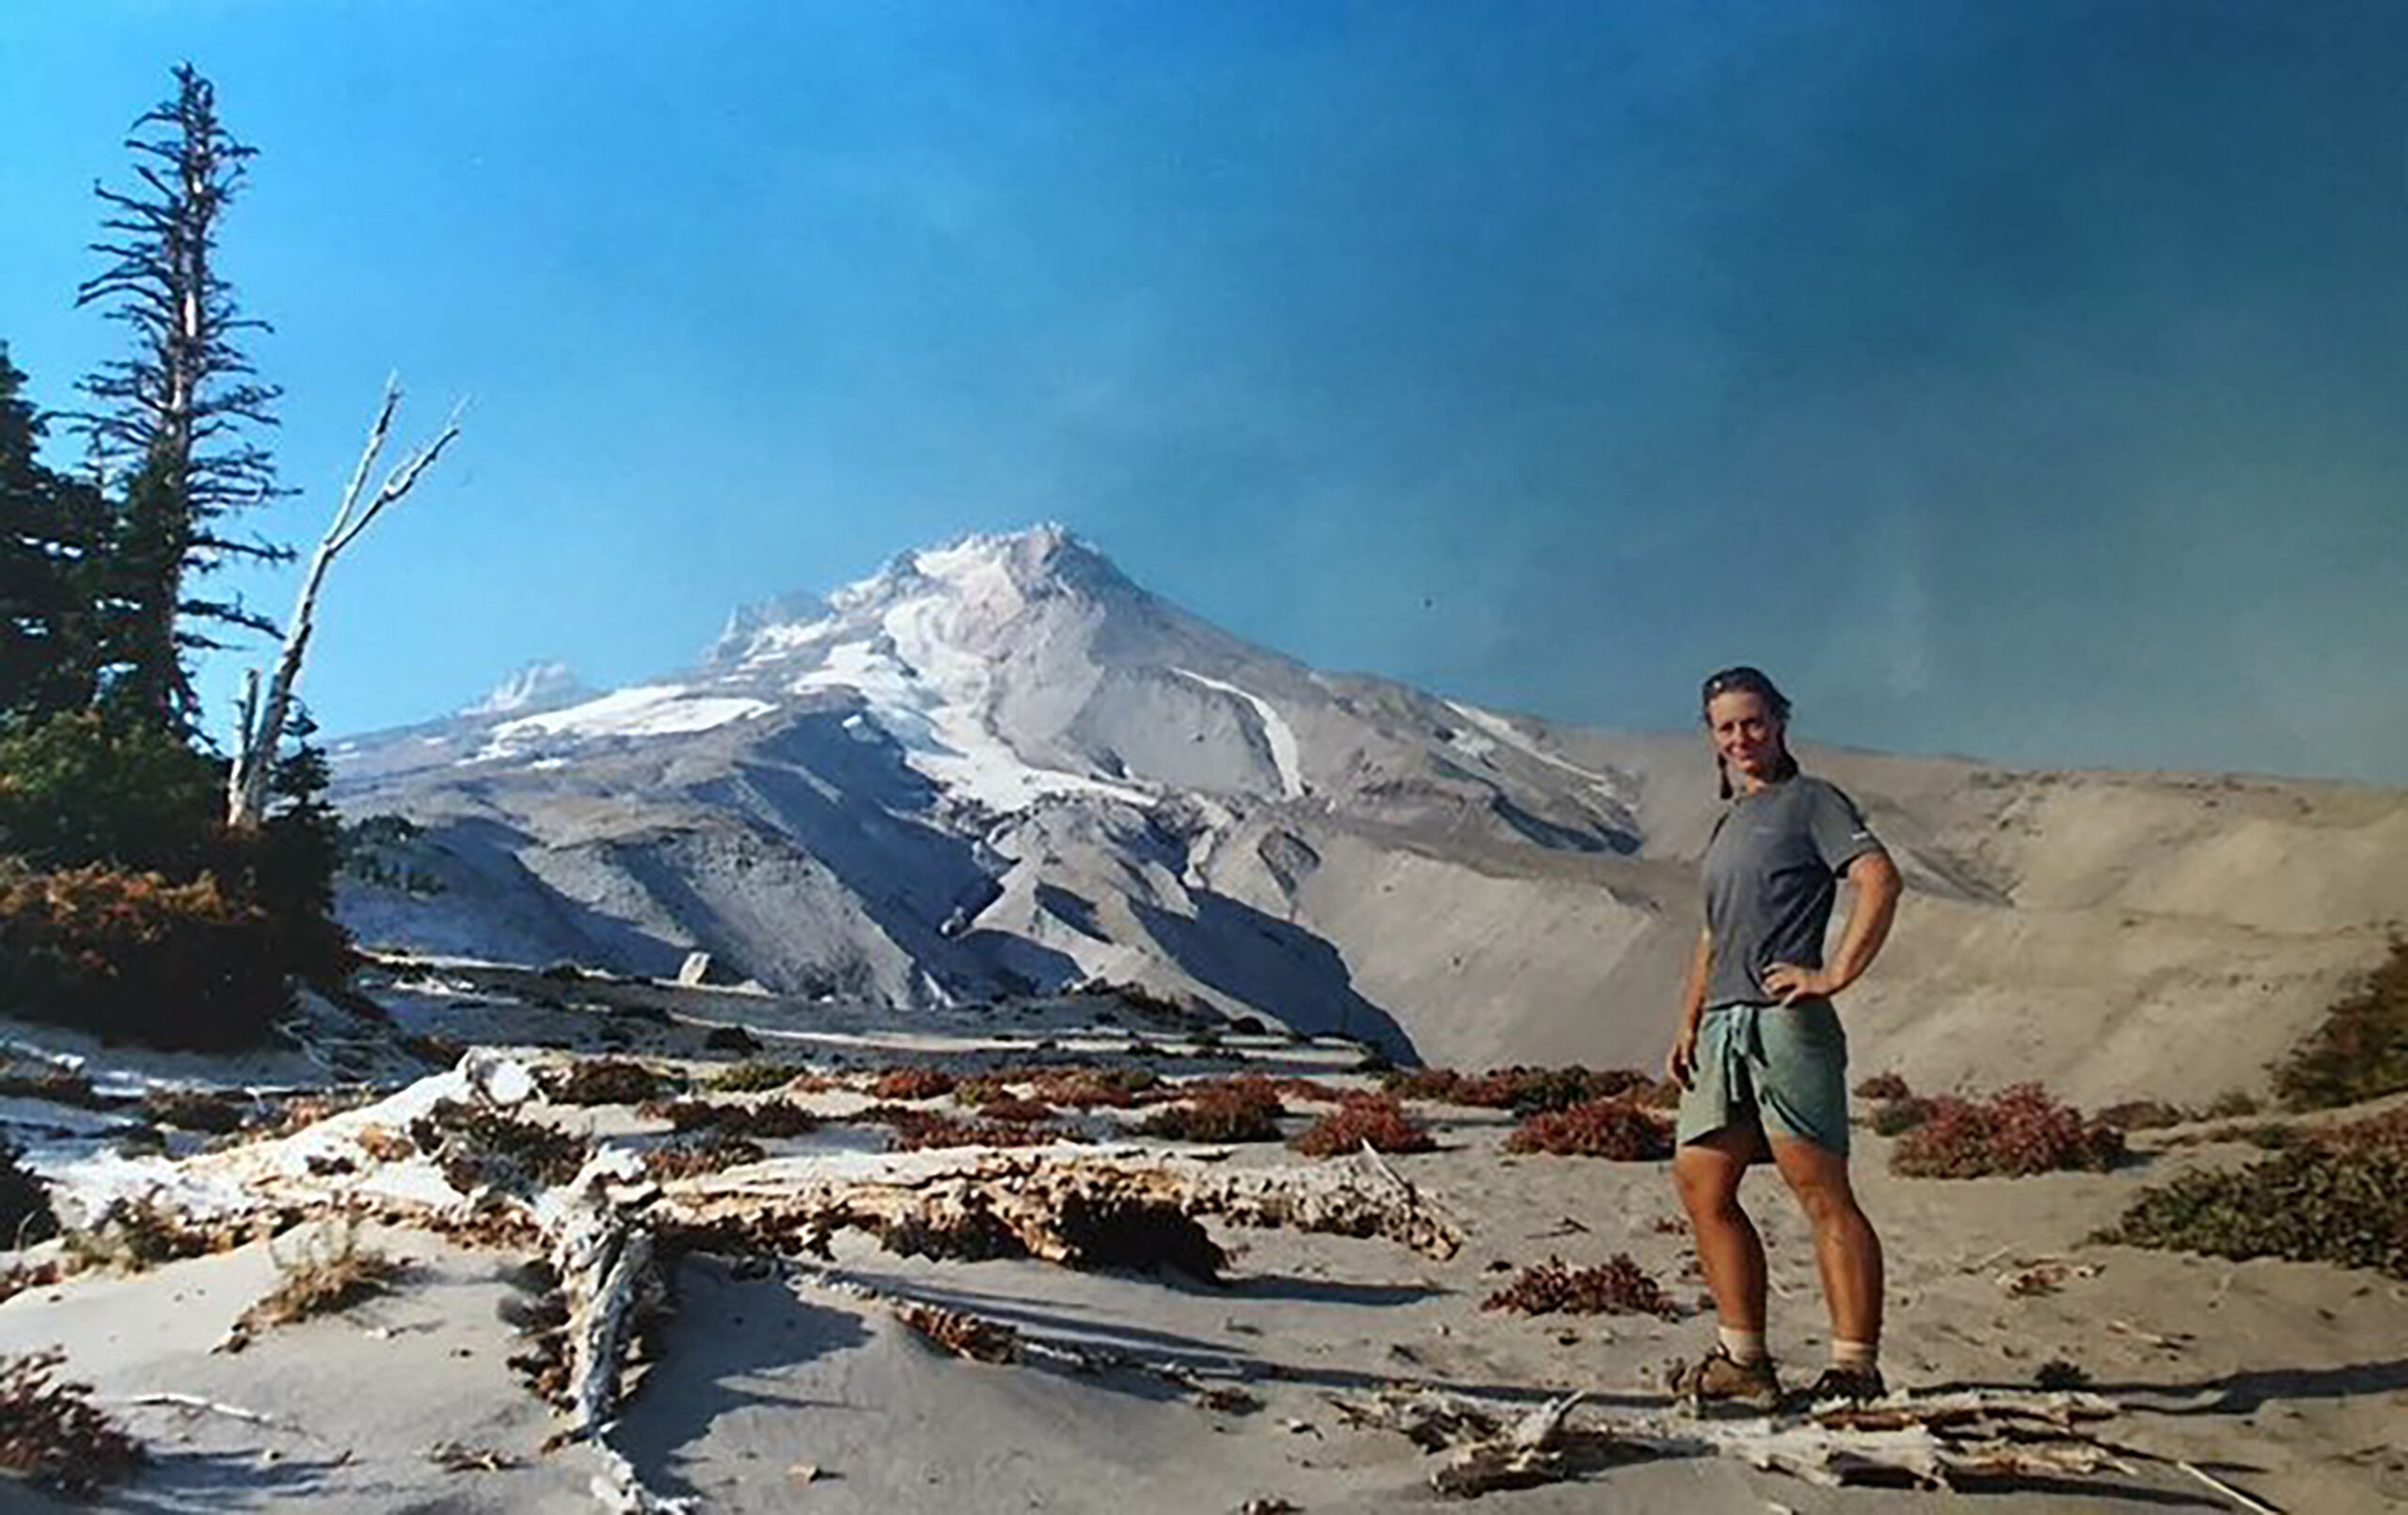 Arlette Laan poses on the Pacific Crest Trail